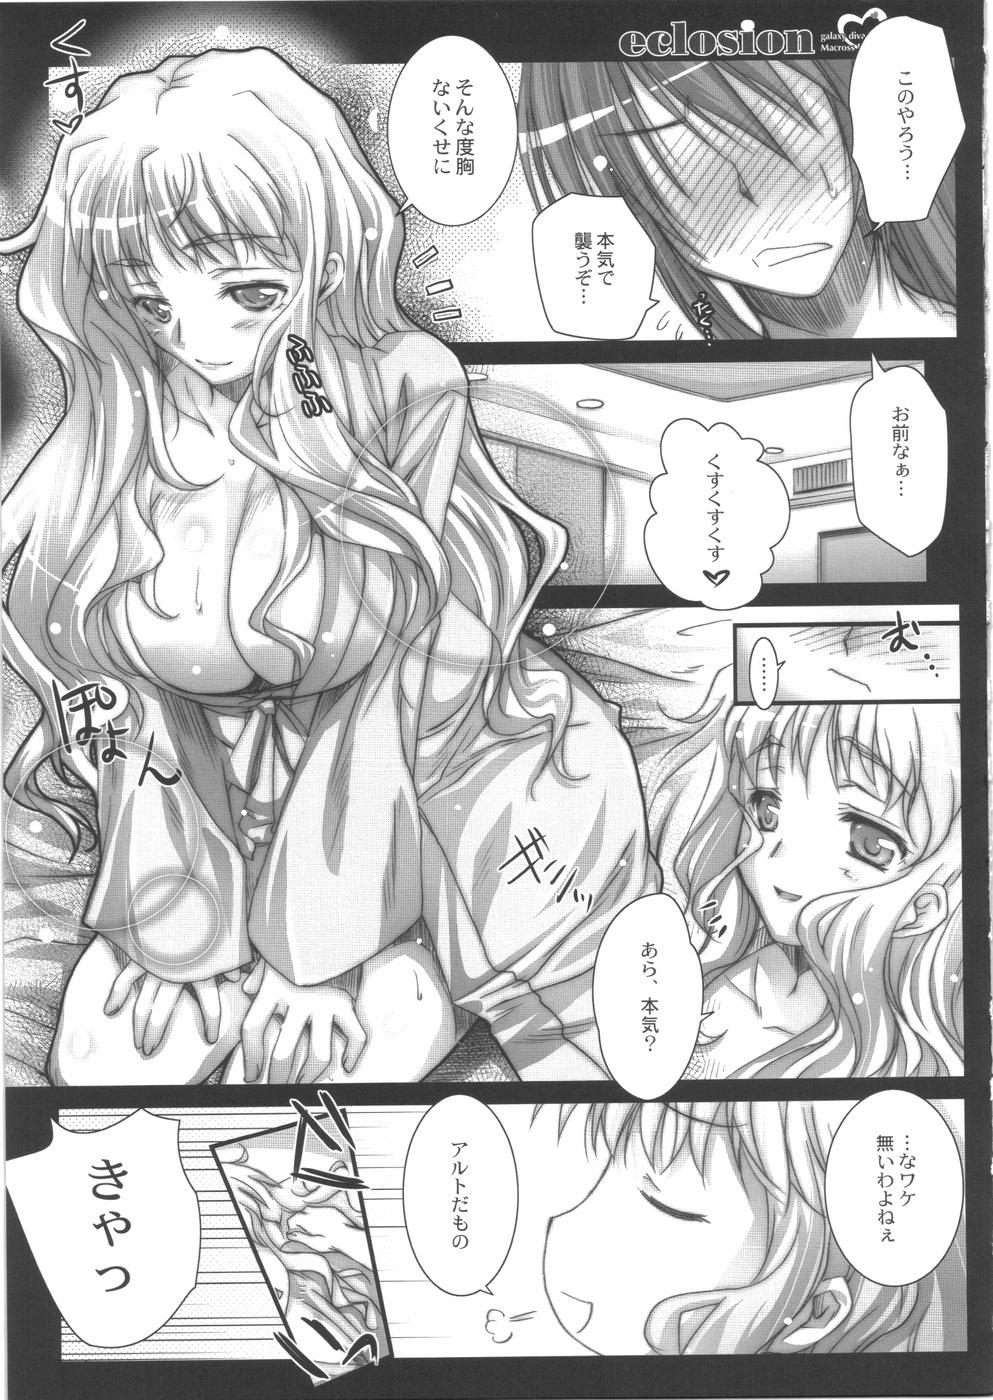 Couch eclosion - Macross frontier Edging - Page 9